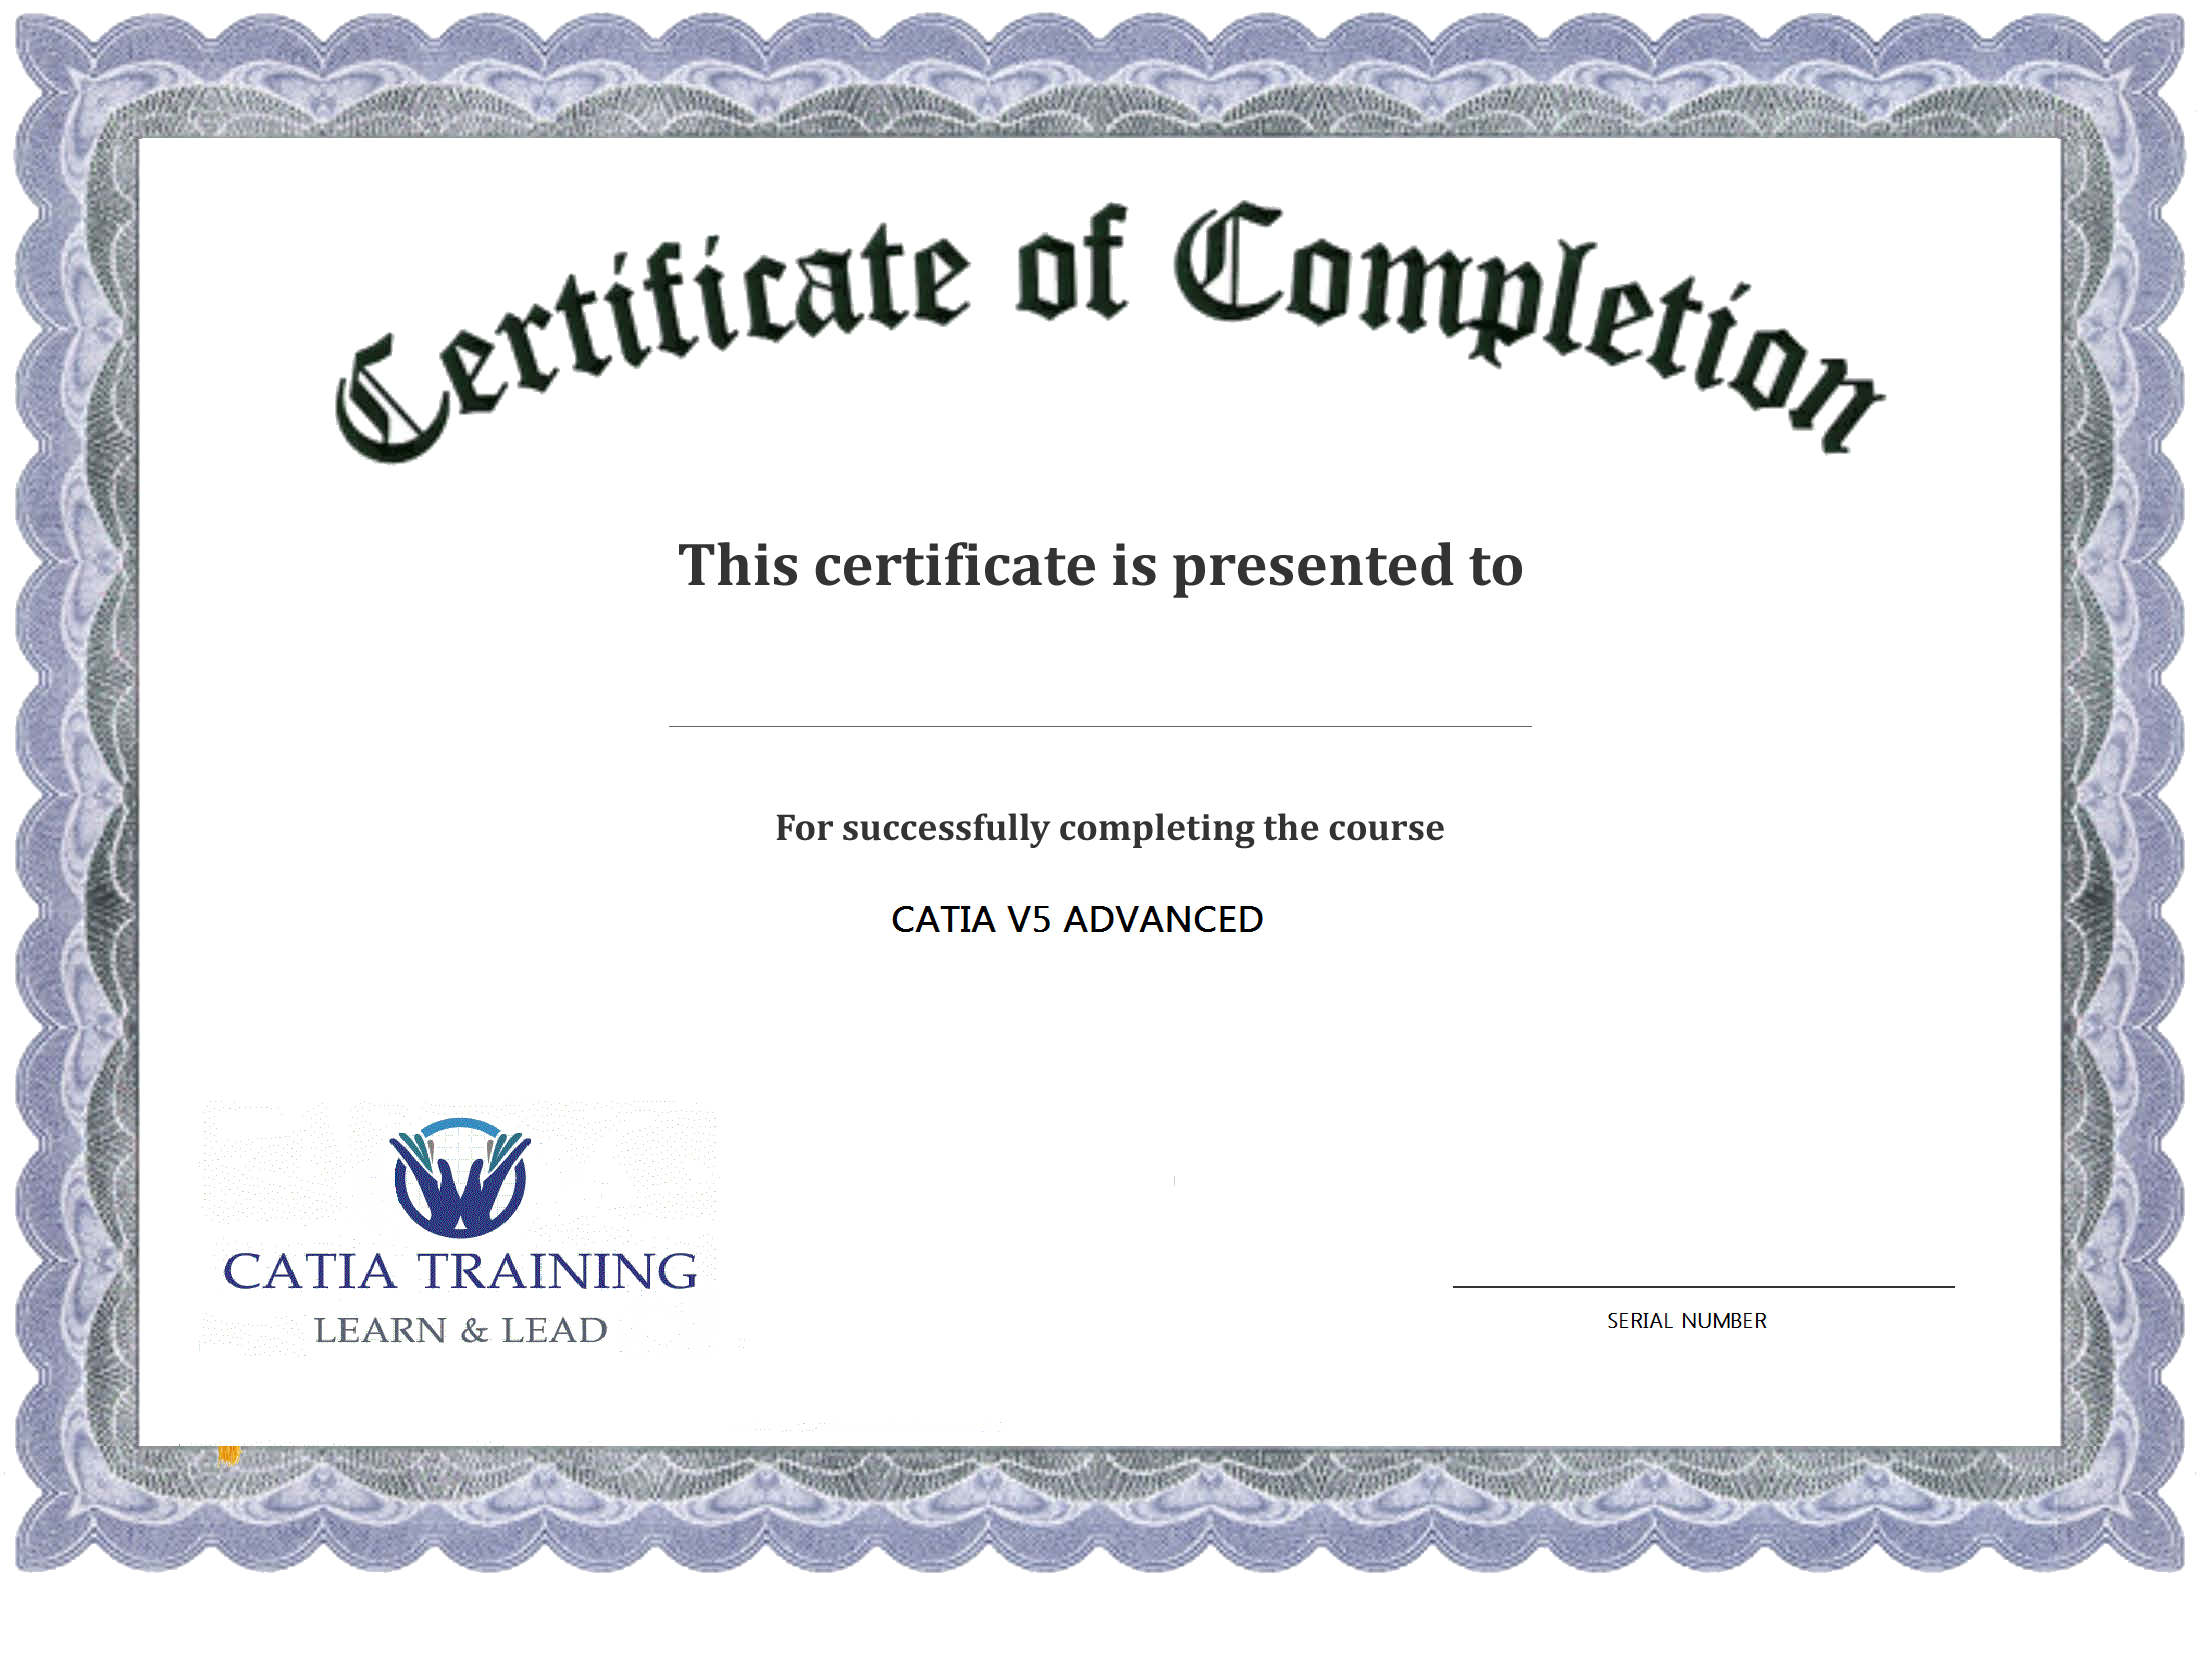 10 Certificate Of Completion Templates Free Download Images For Free Training Completion Certificate Templates